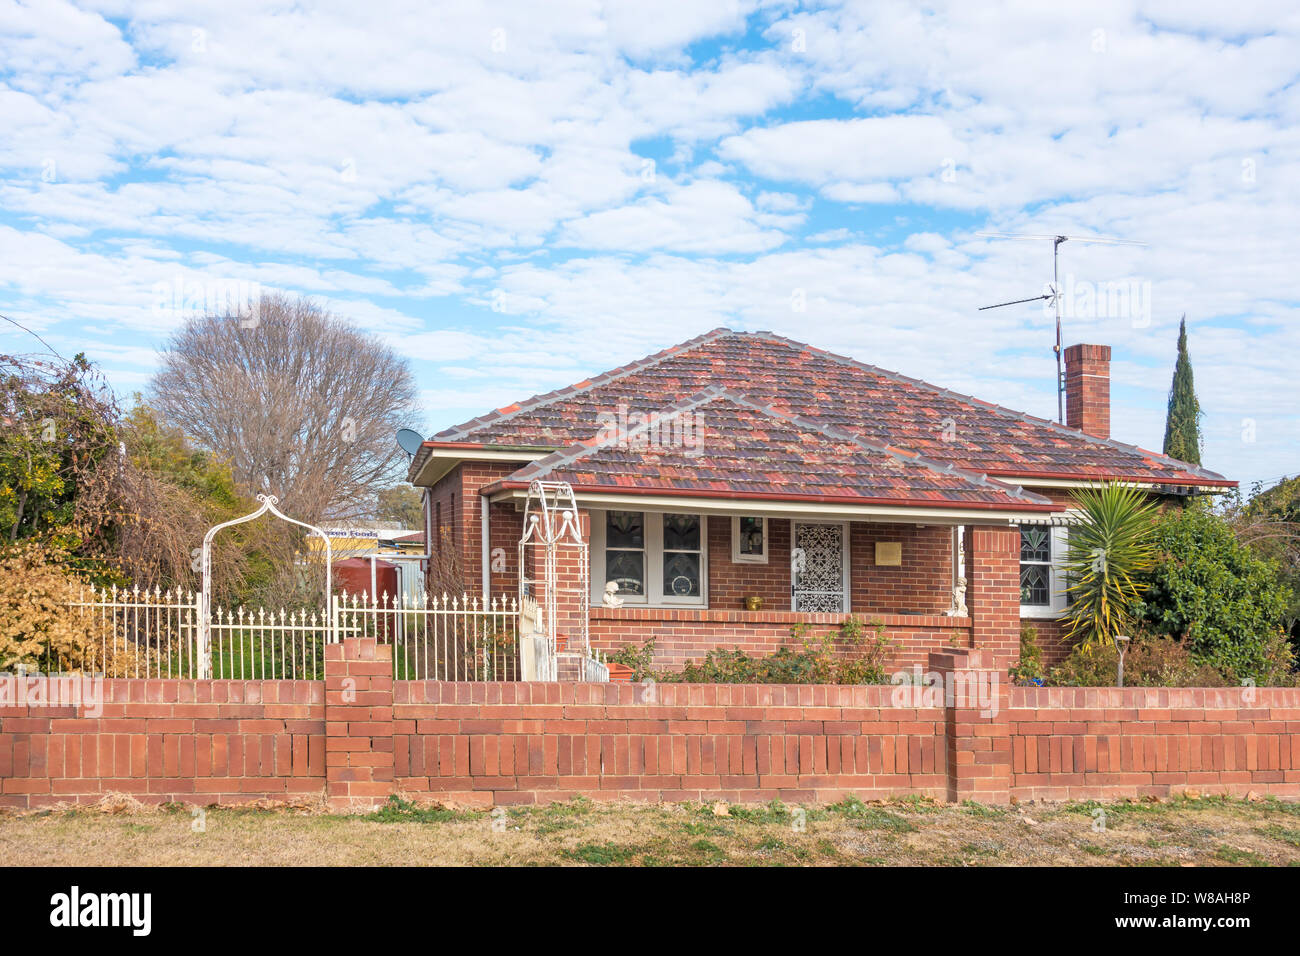 1920s brick bungalow with terracotta tile roof and brick wall front fence. Tamworth Australia. Stock Photo